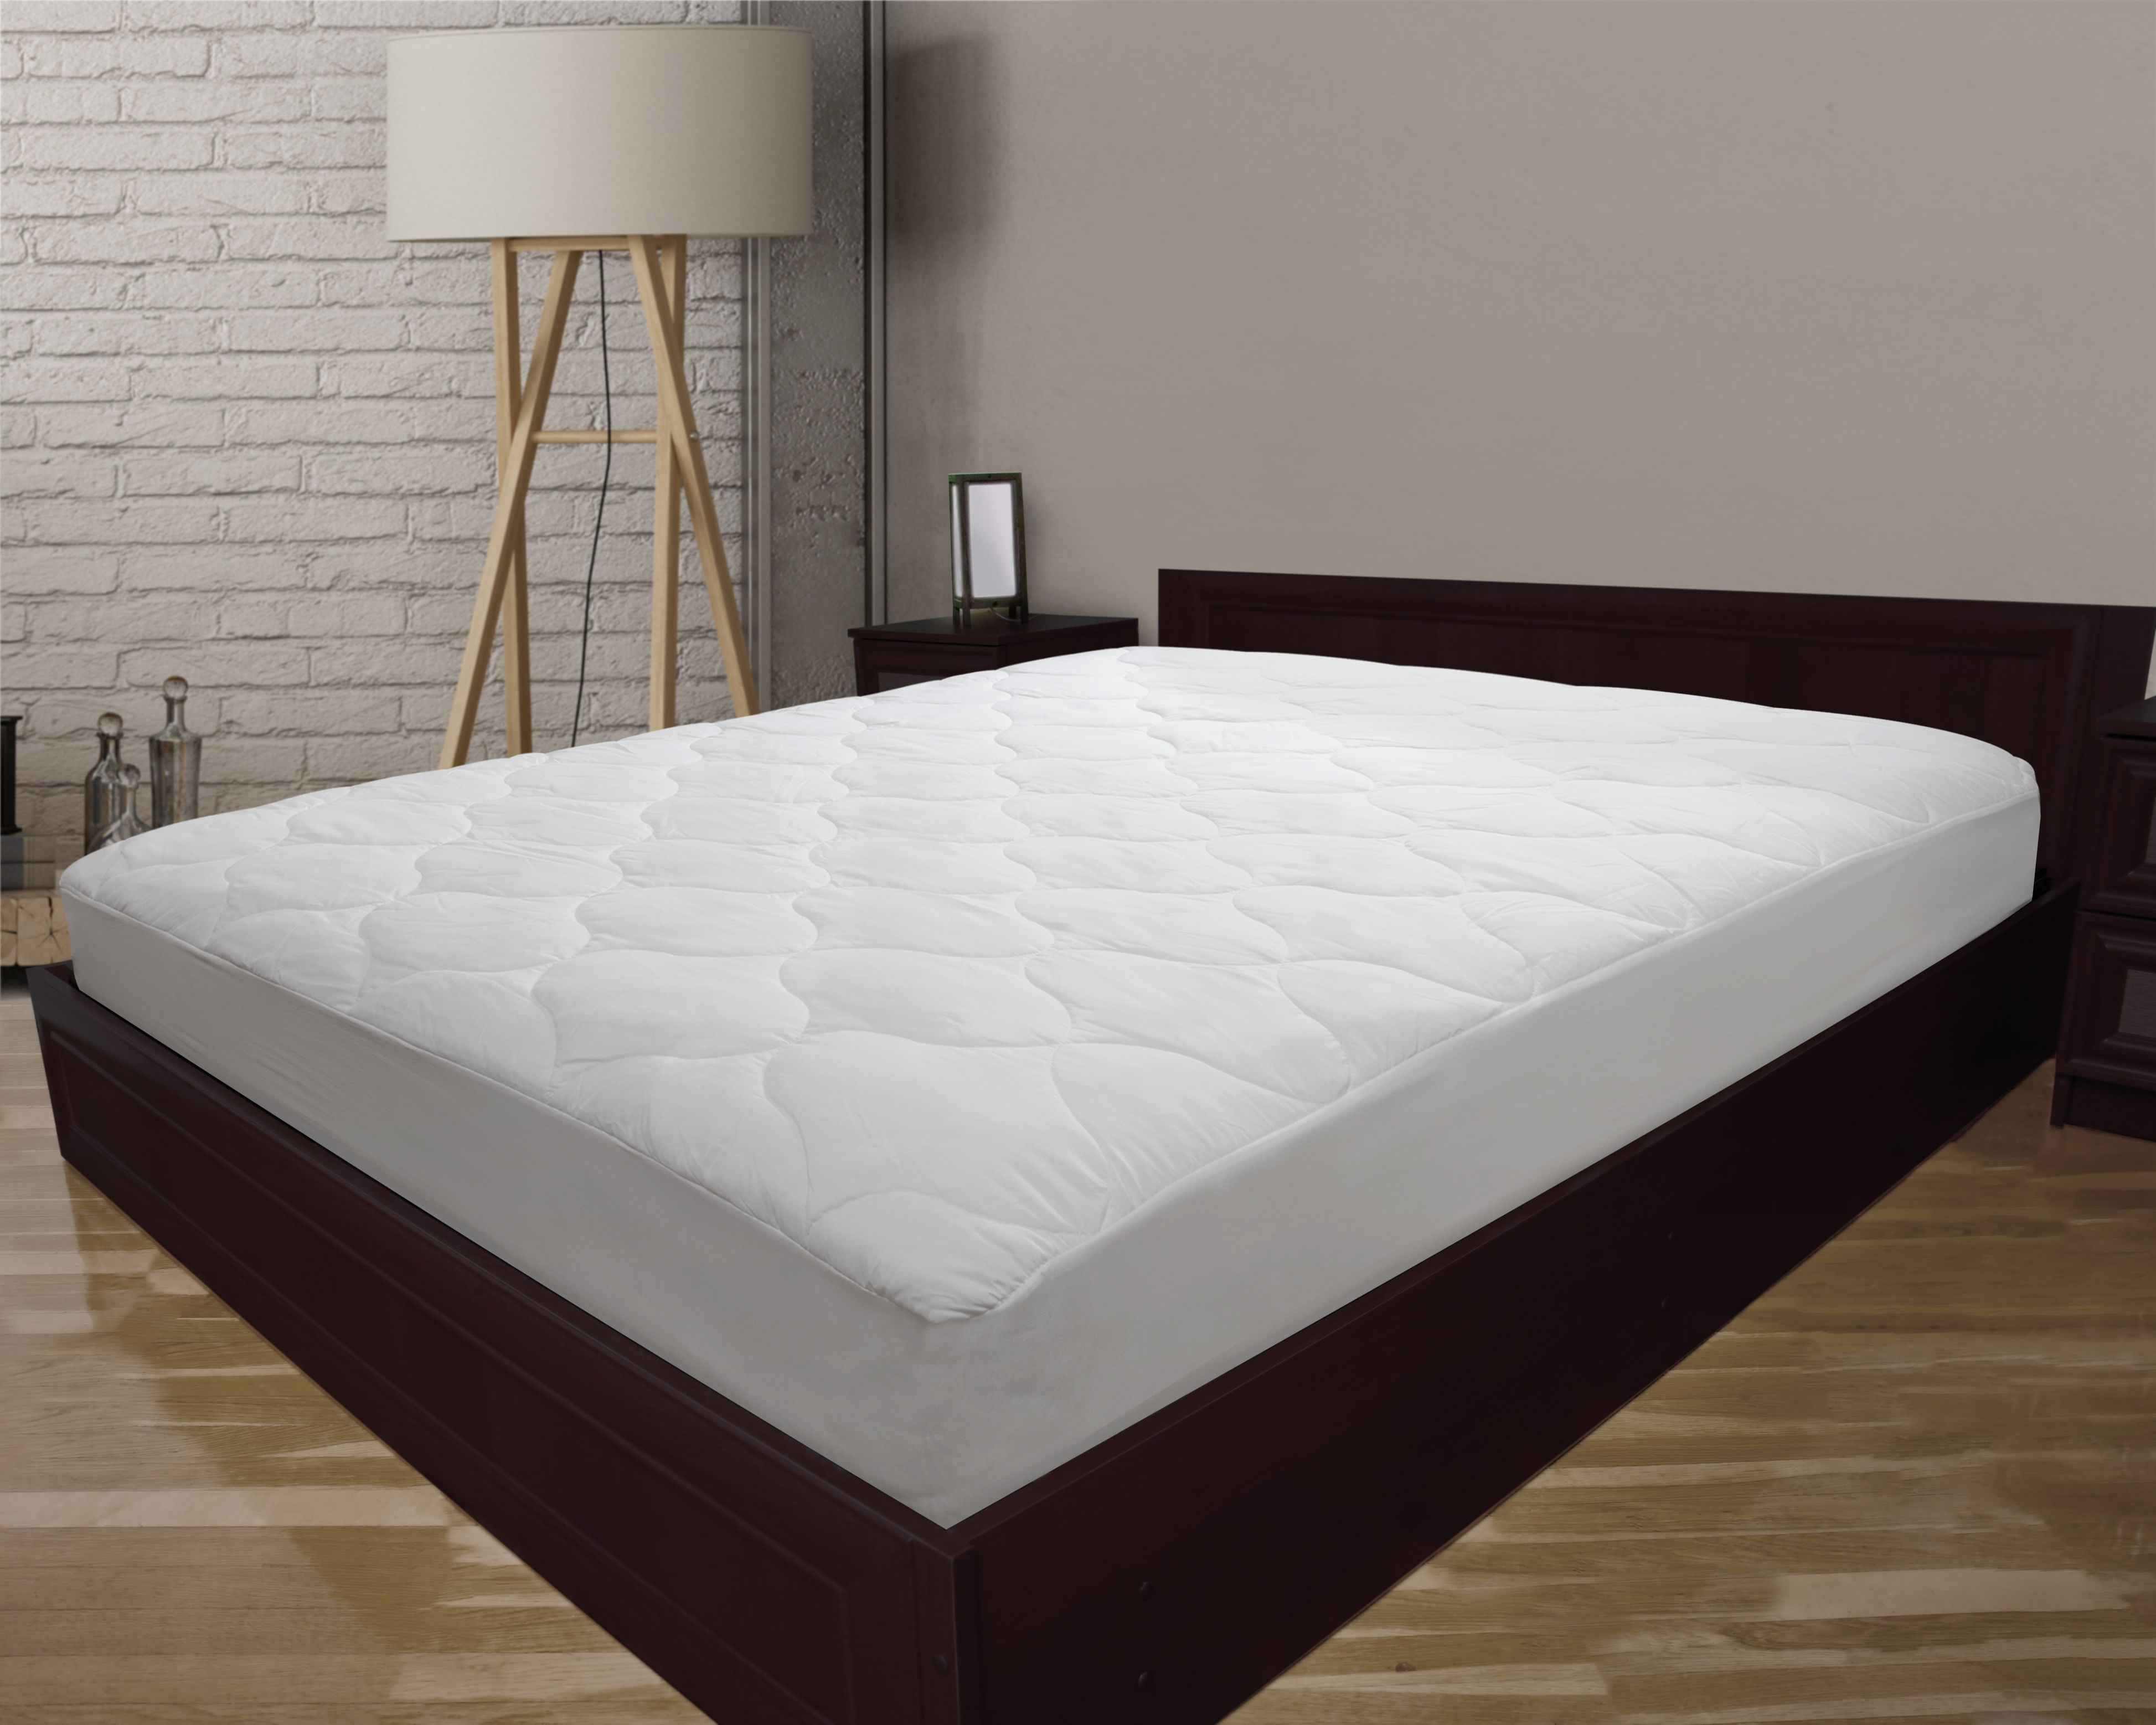 king size protective mattress cover